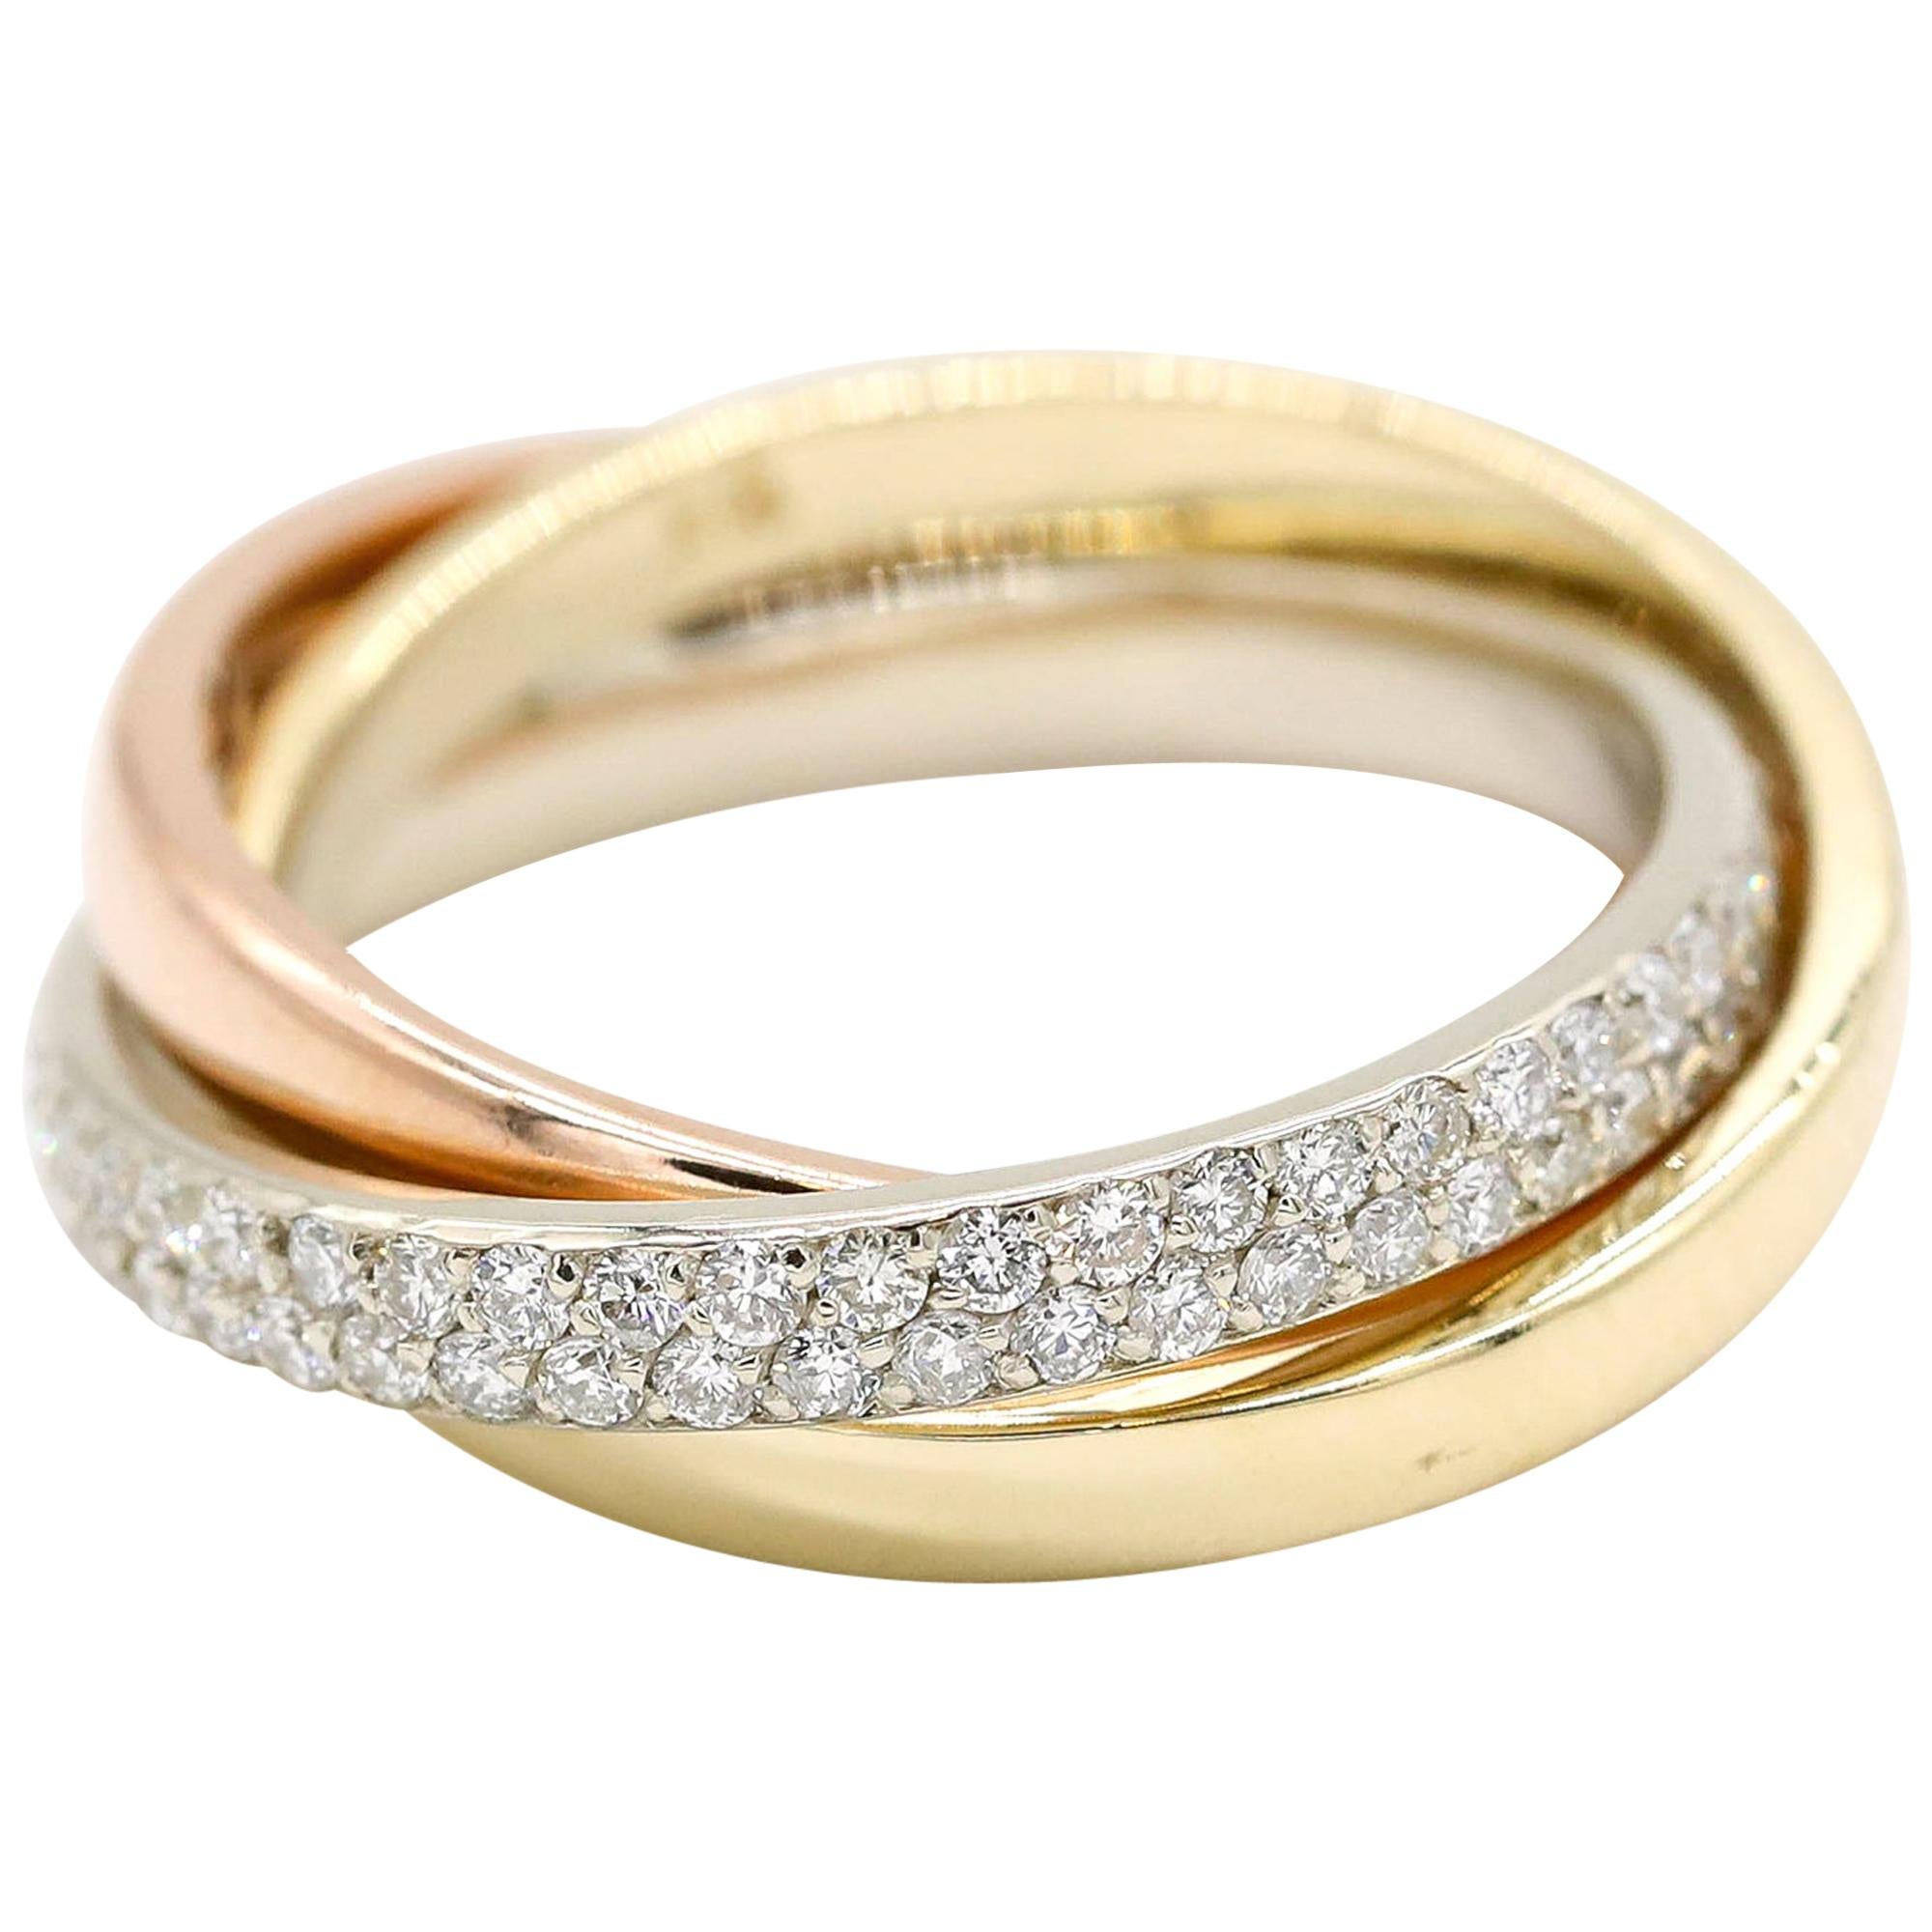 1.0 ctw Classic Triple Band Diamond Ring in 14 Karat Yellow Gold Triple Tone Gold Ring

Three beautiful bands intertwined, symbolizing trinity. A modern, yet classic design. Featuring stunning diamonds encrusted in a double row pavè setting along